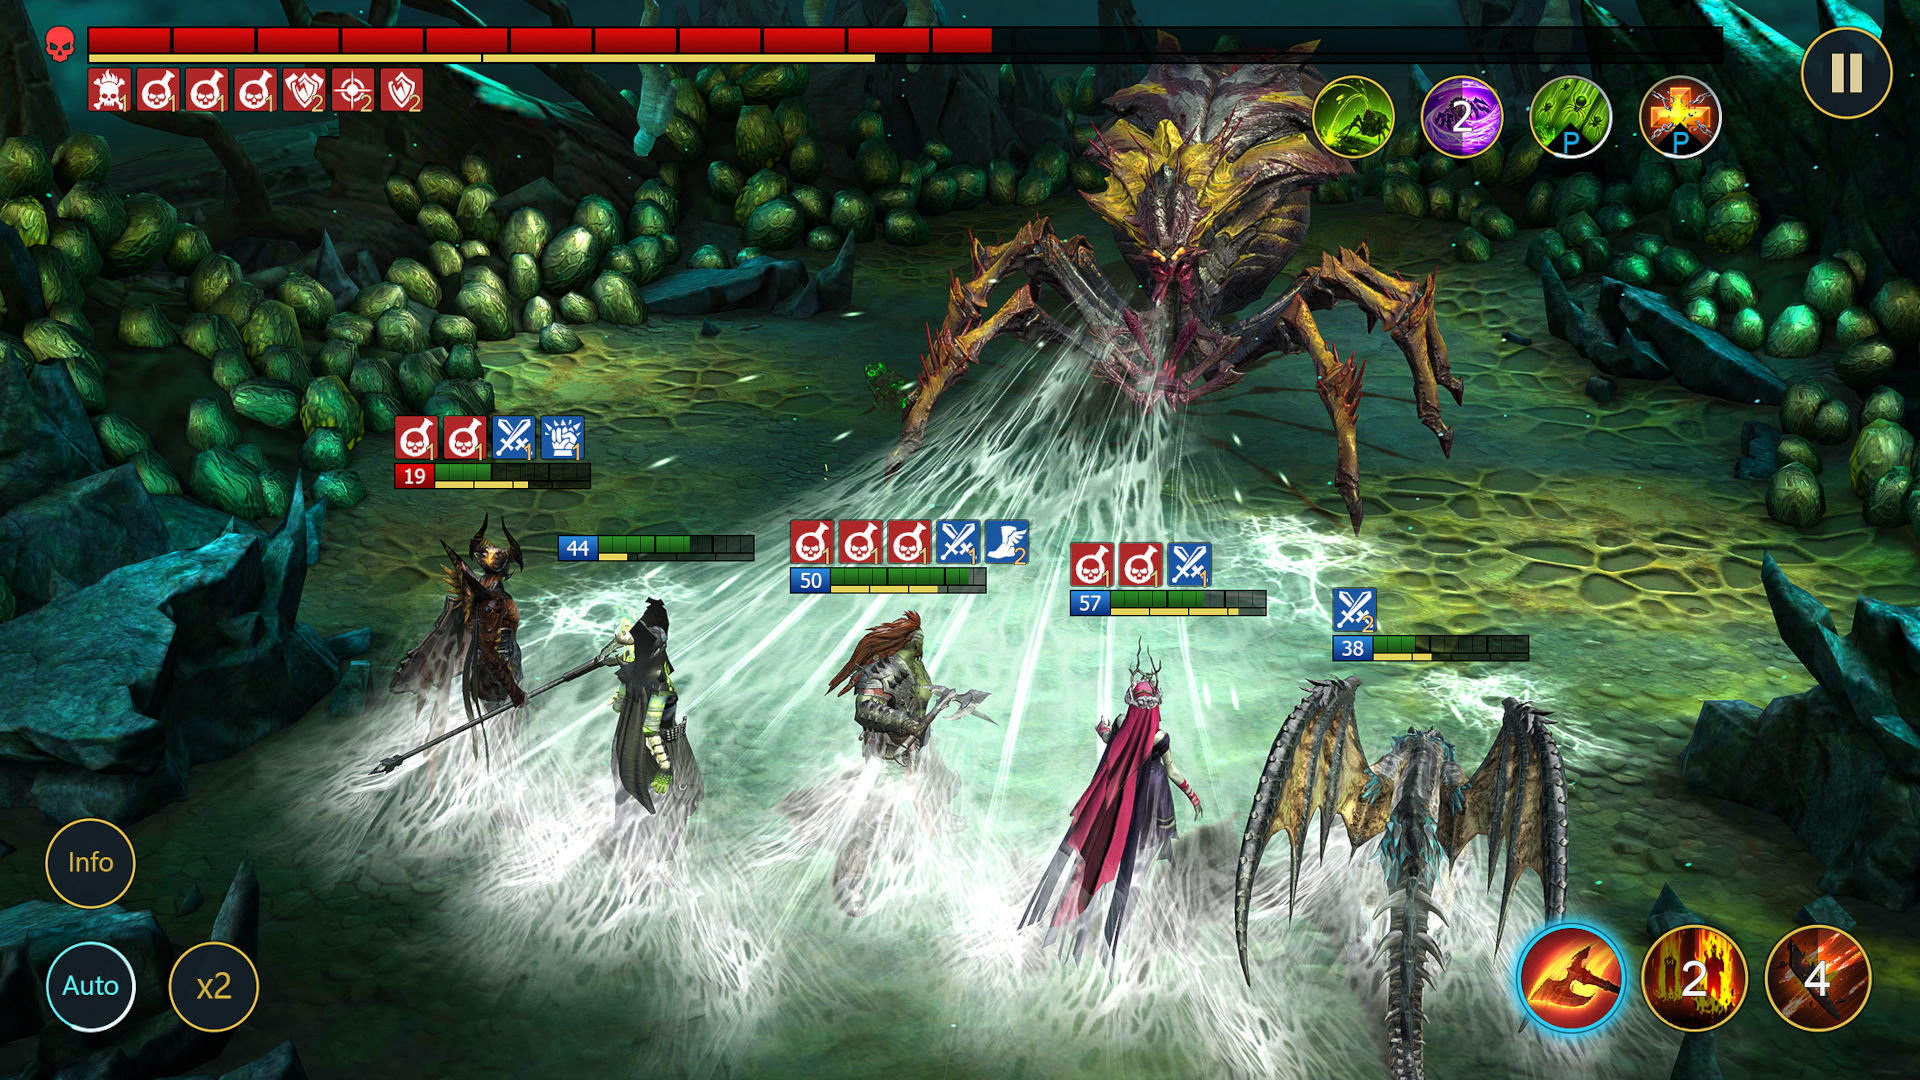 Best mobile games: a party of heroes fighting a gigantic spider in Raid: Shadow Legends